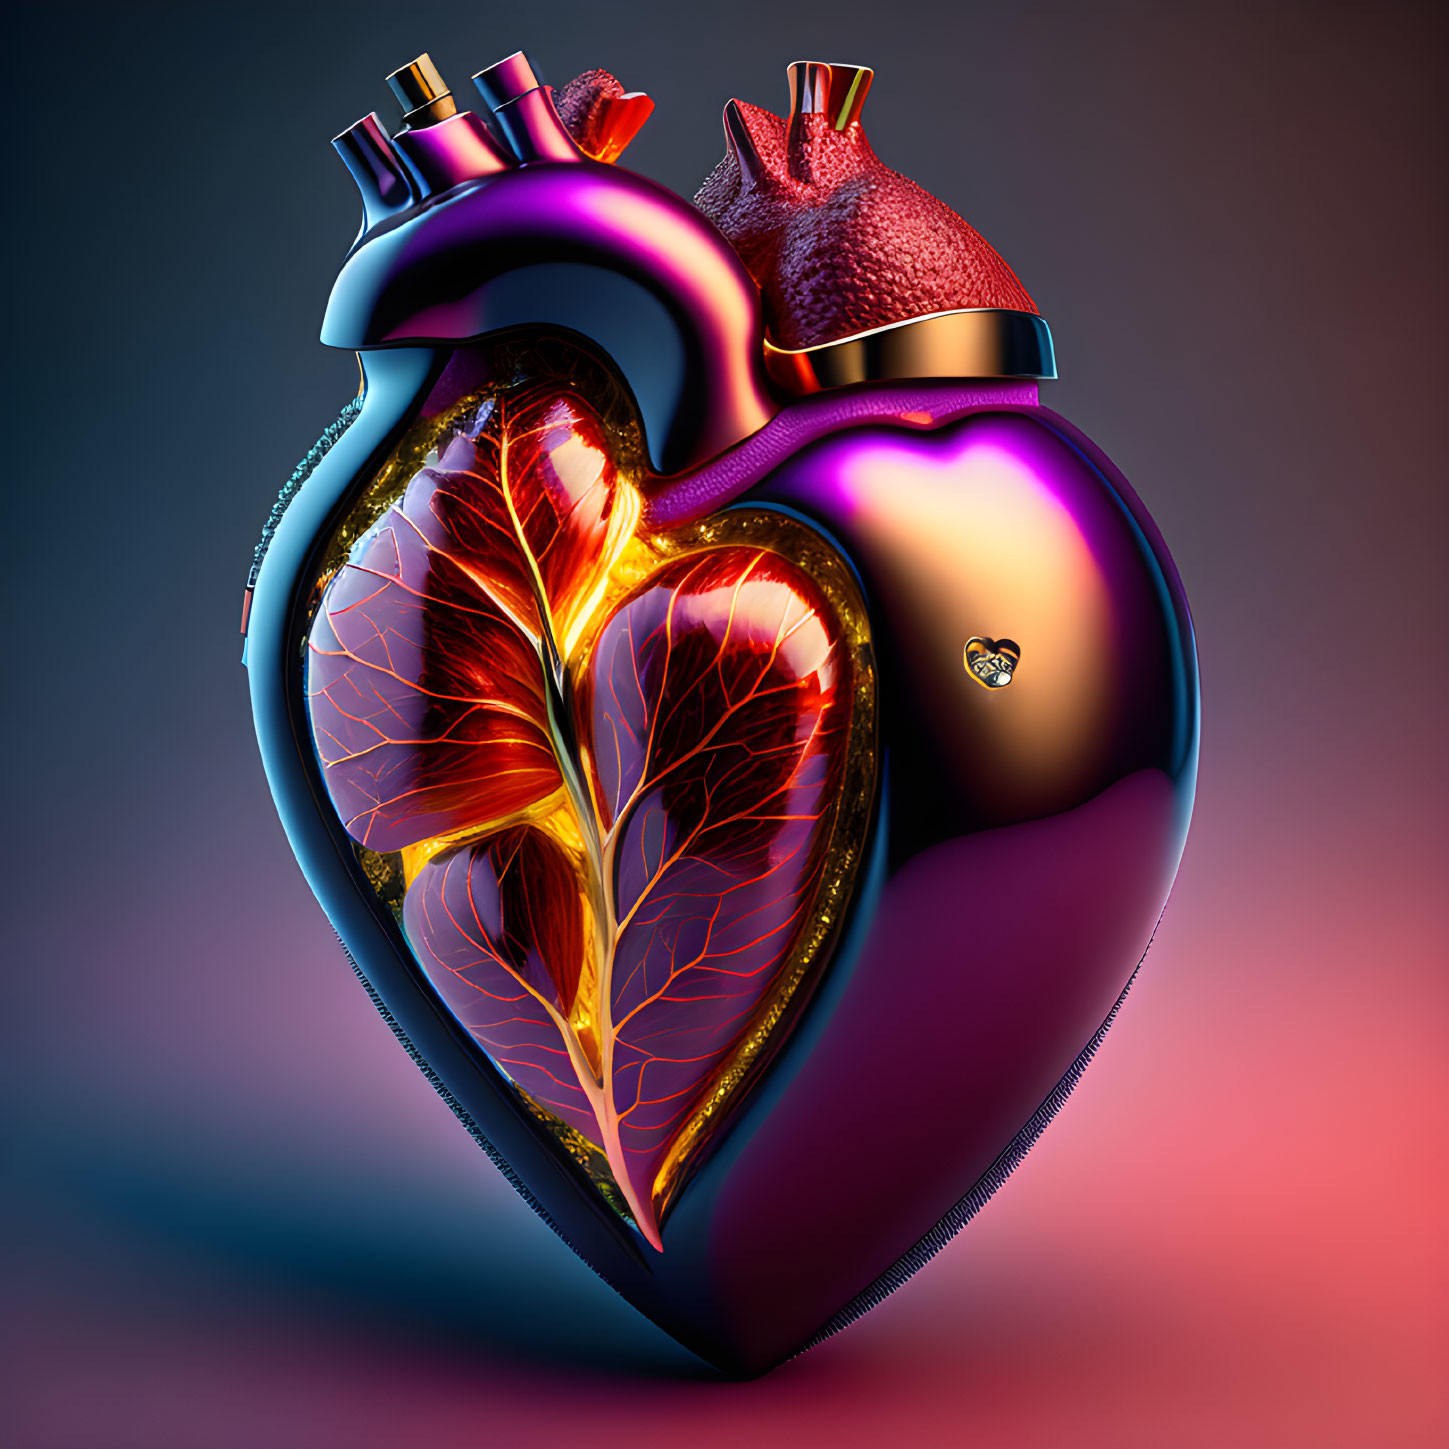 Stylized metallic human heart with golden vascular system on gradient background